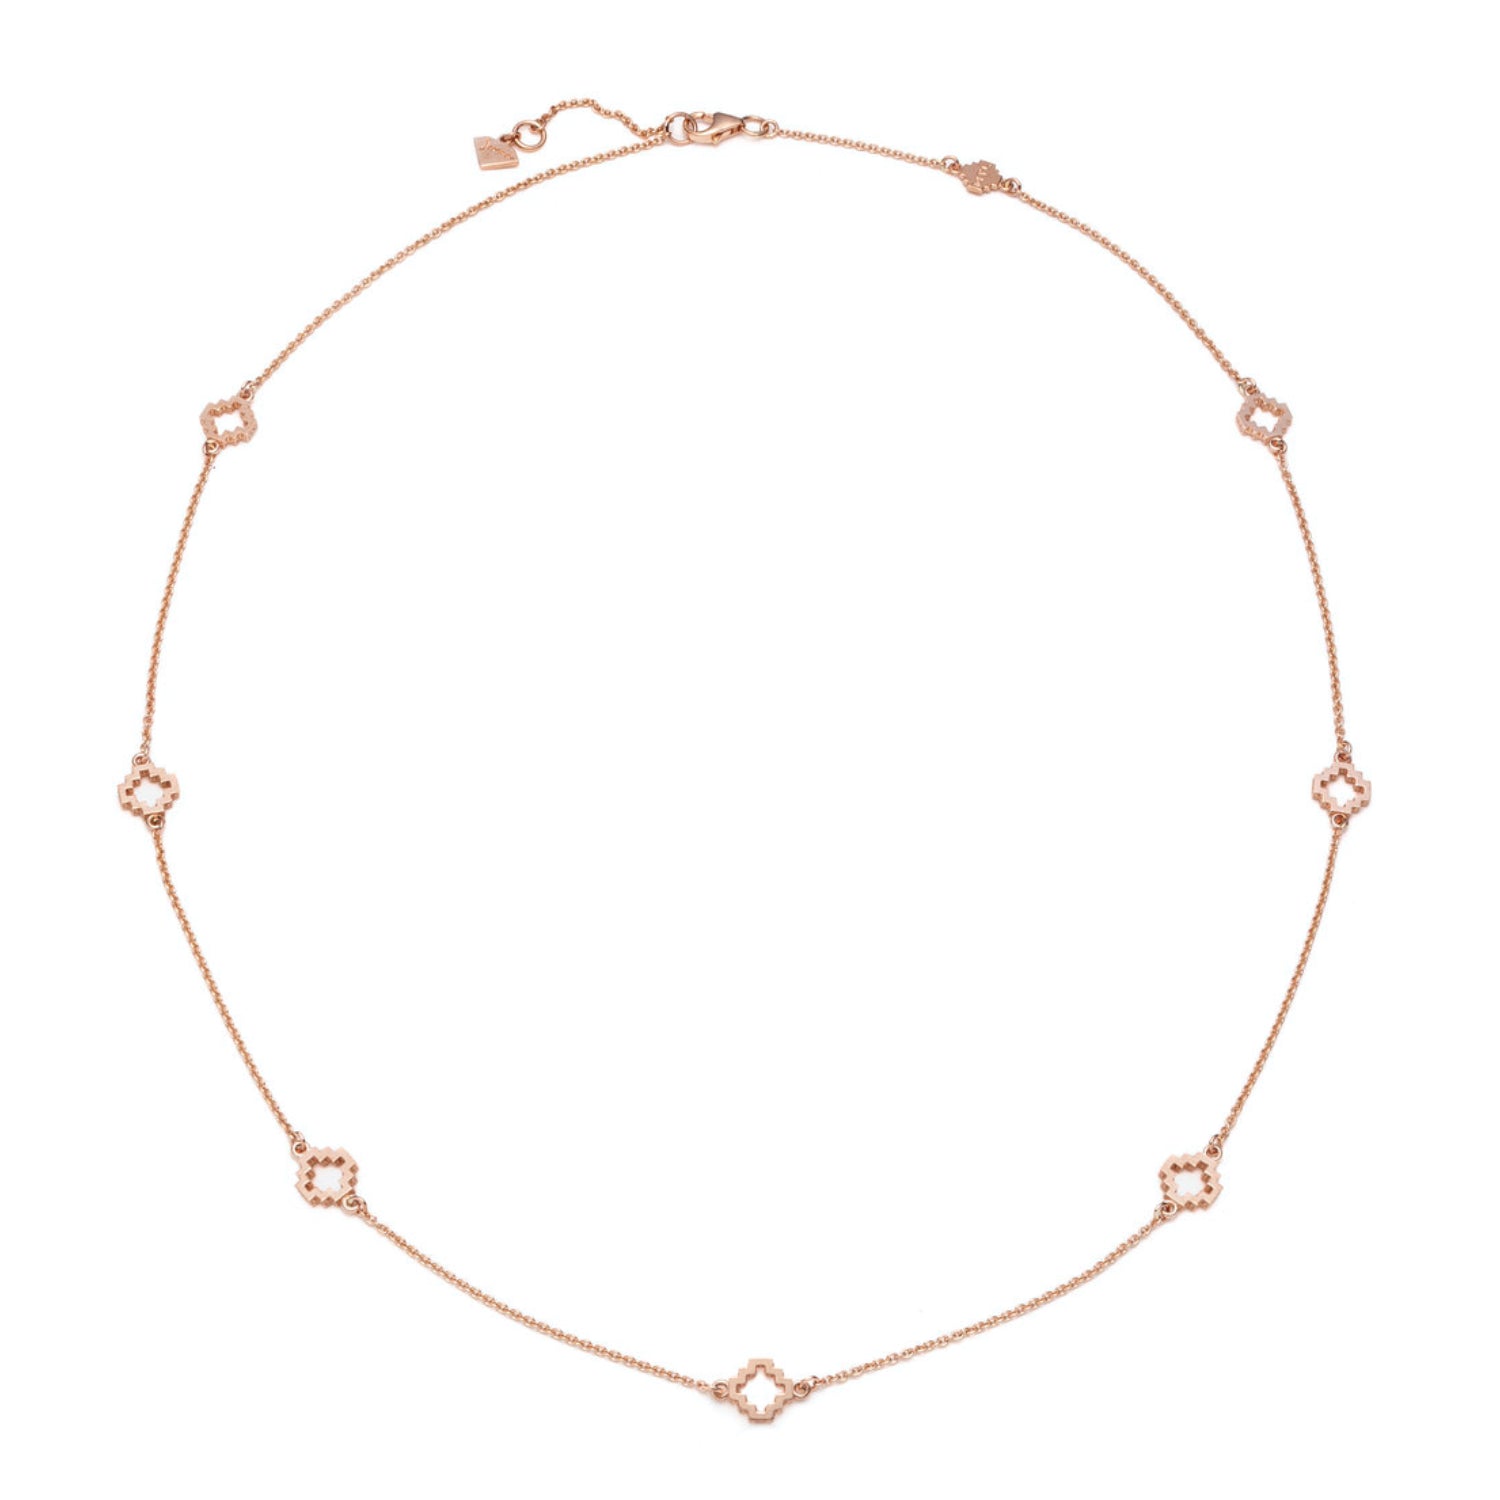 Seven Mini Step Motif Necklace in Rose Gold